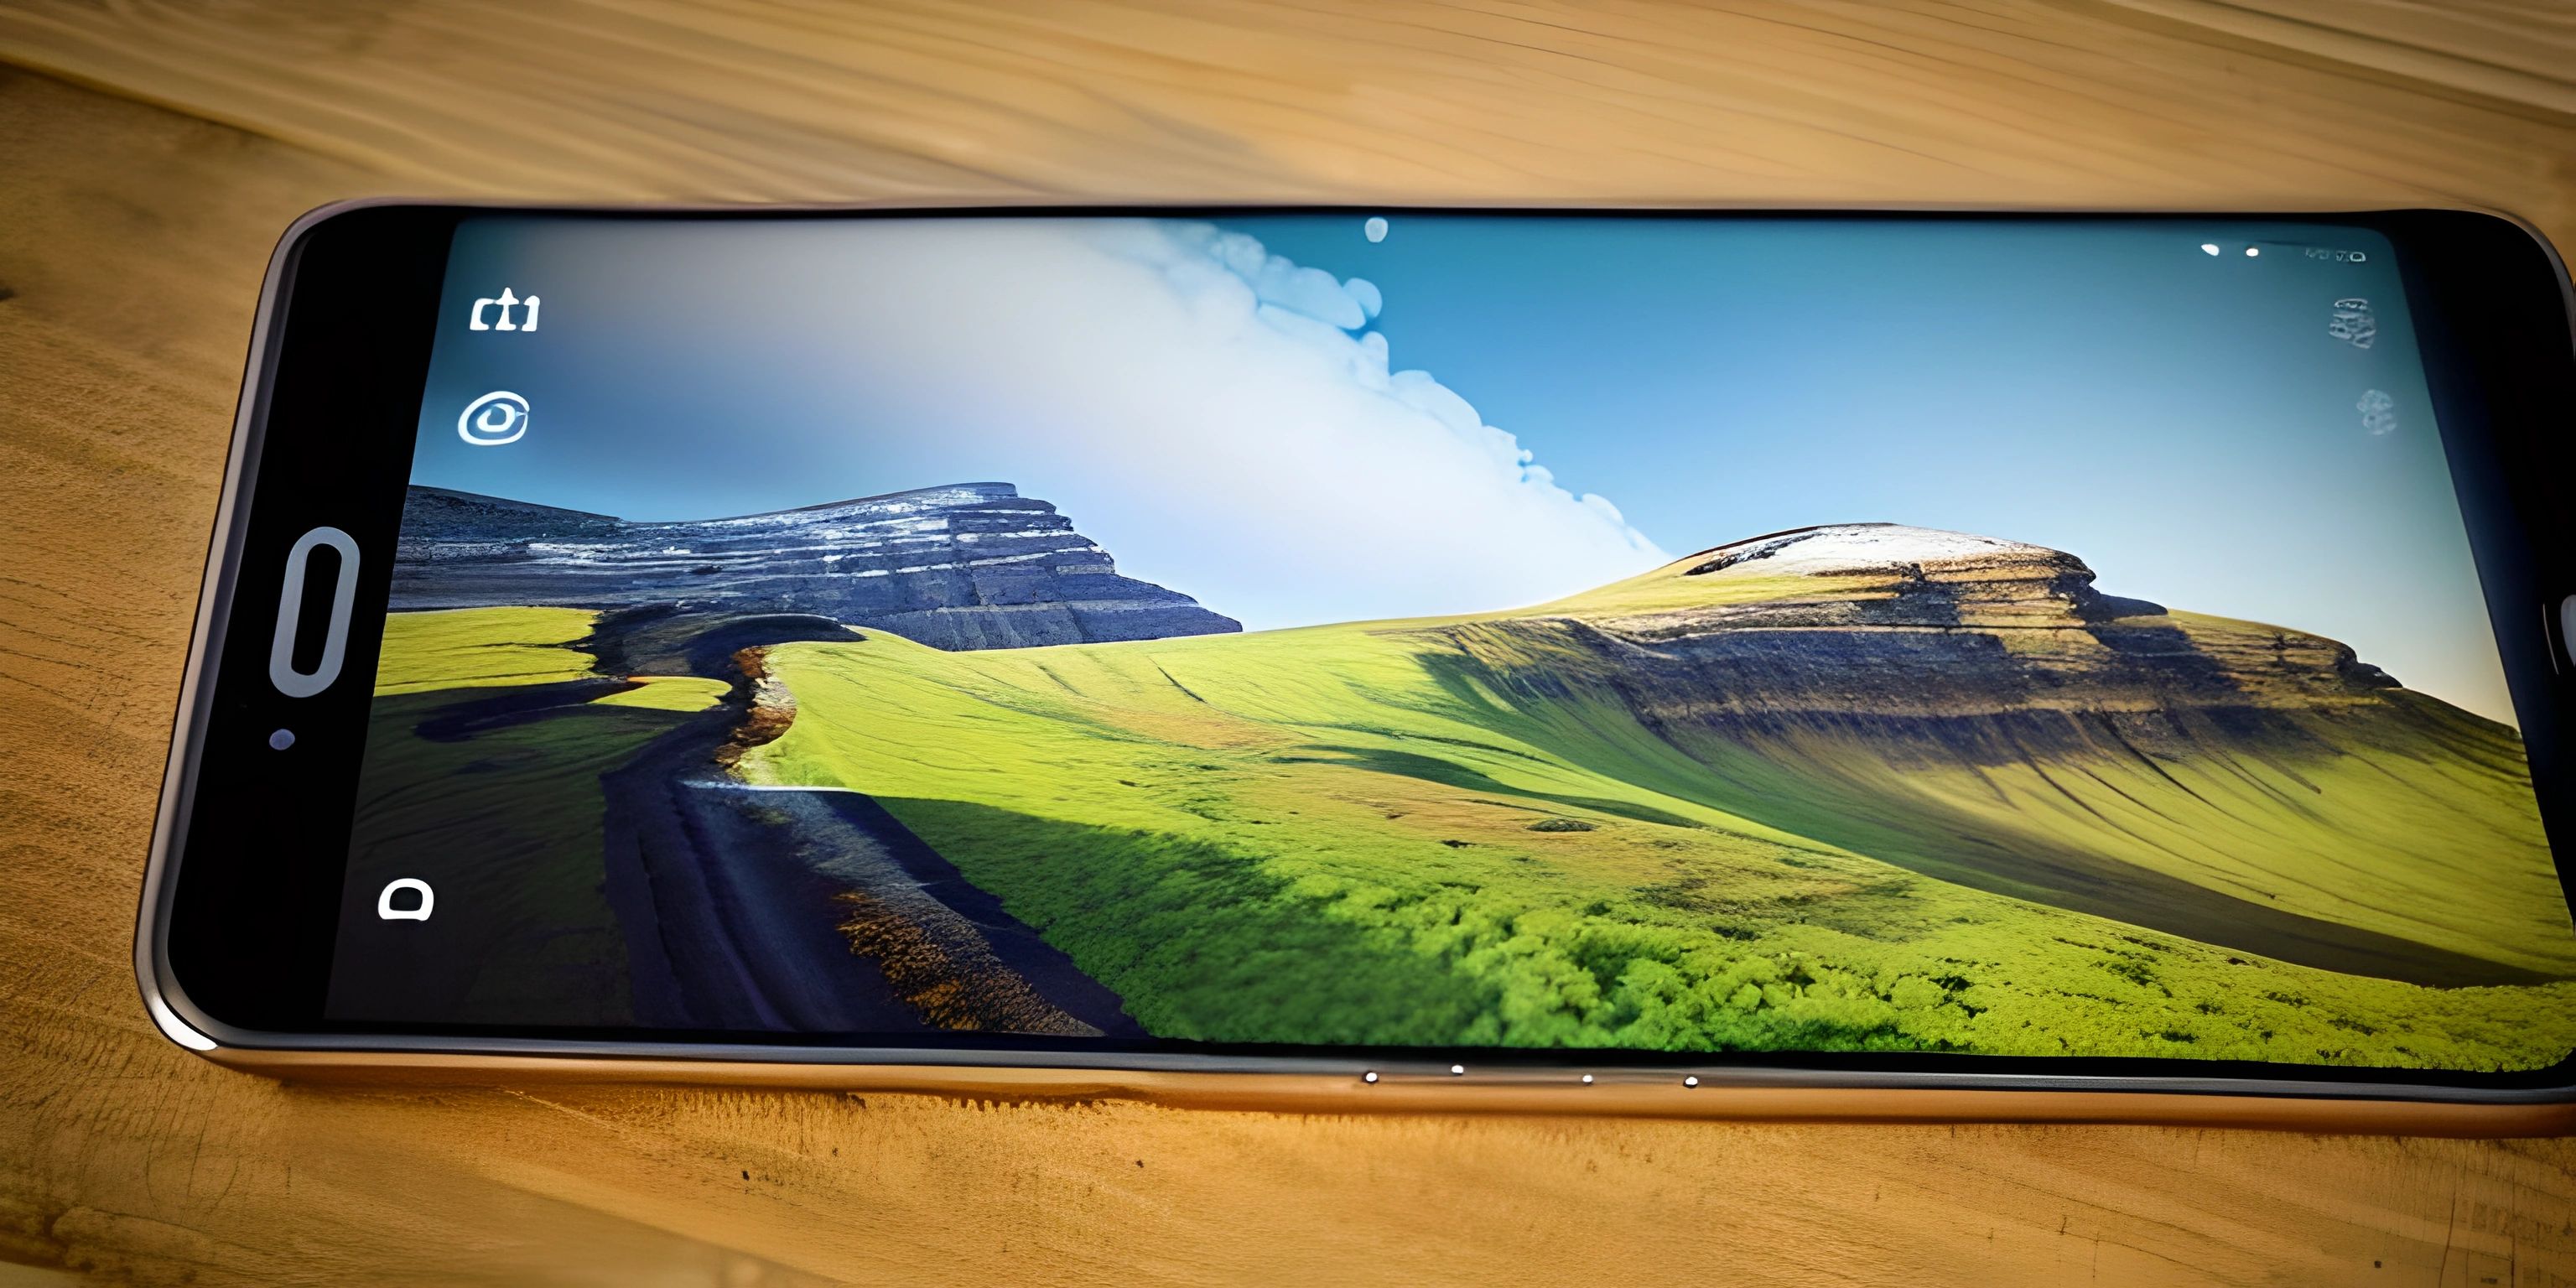 a phone on a wooden table displaying its image in the screen space with mountains in the background